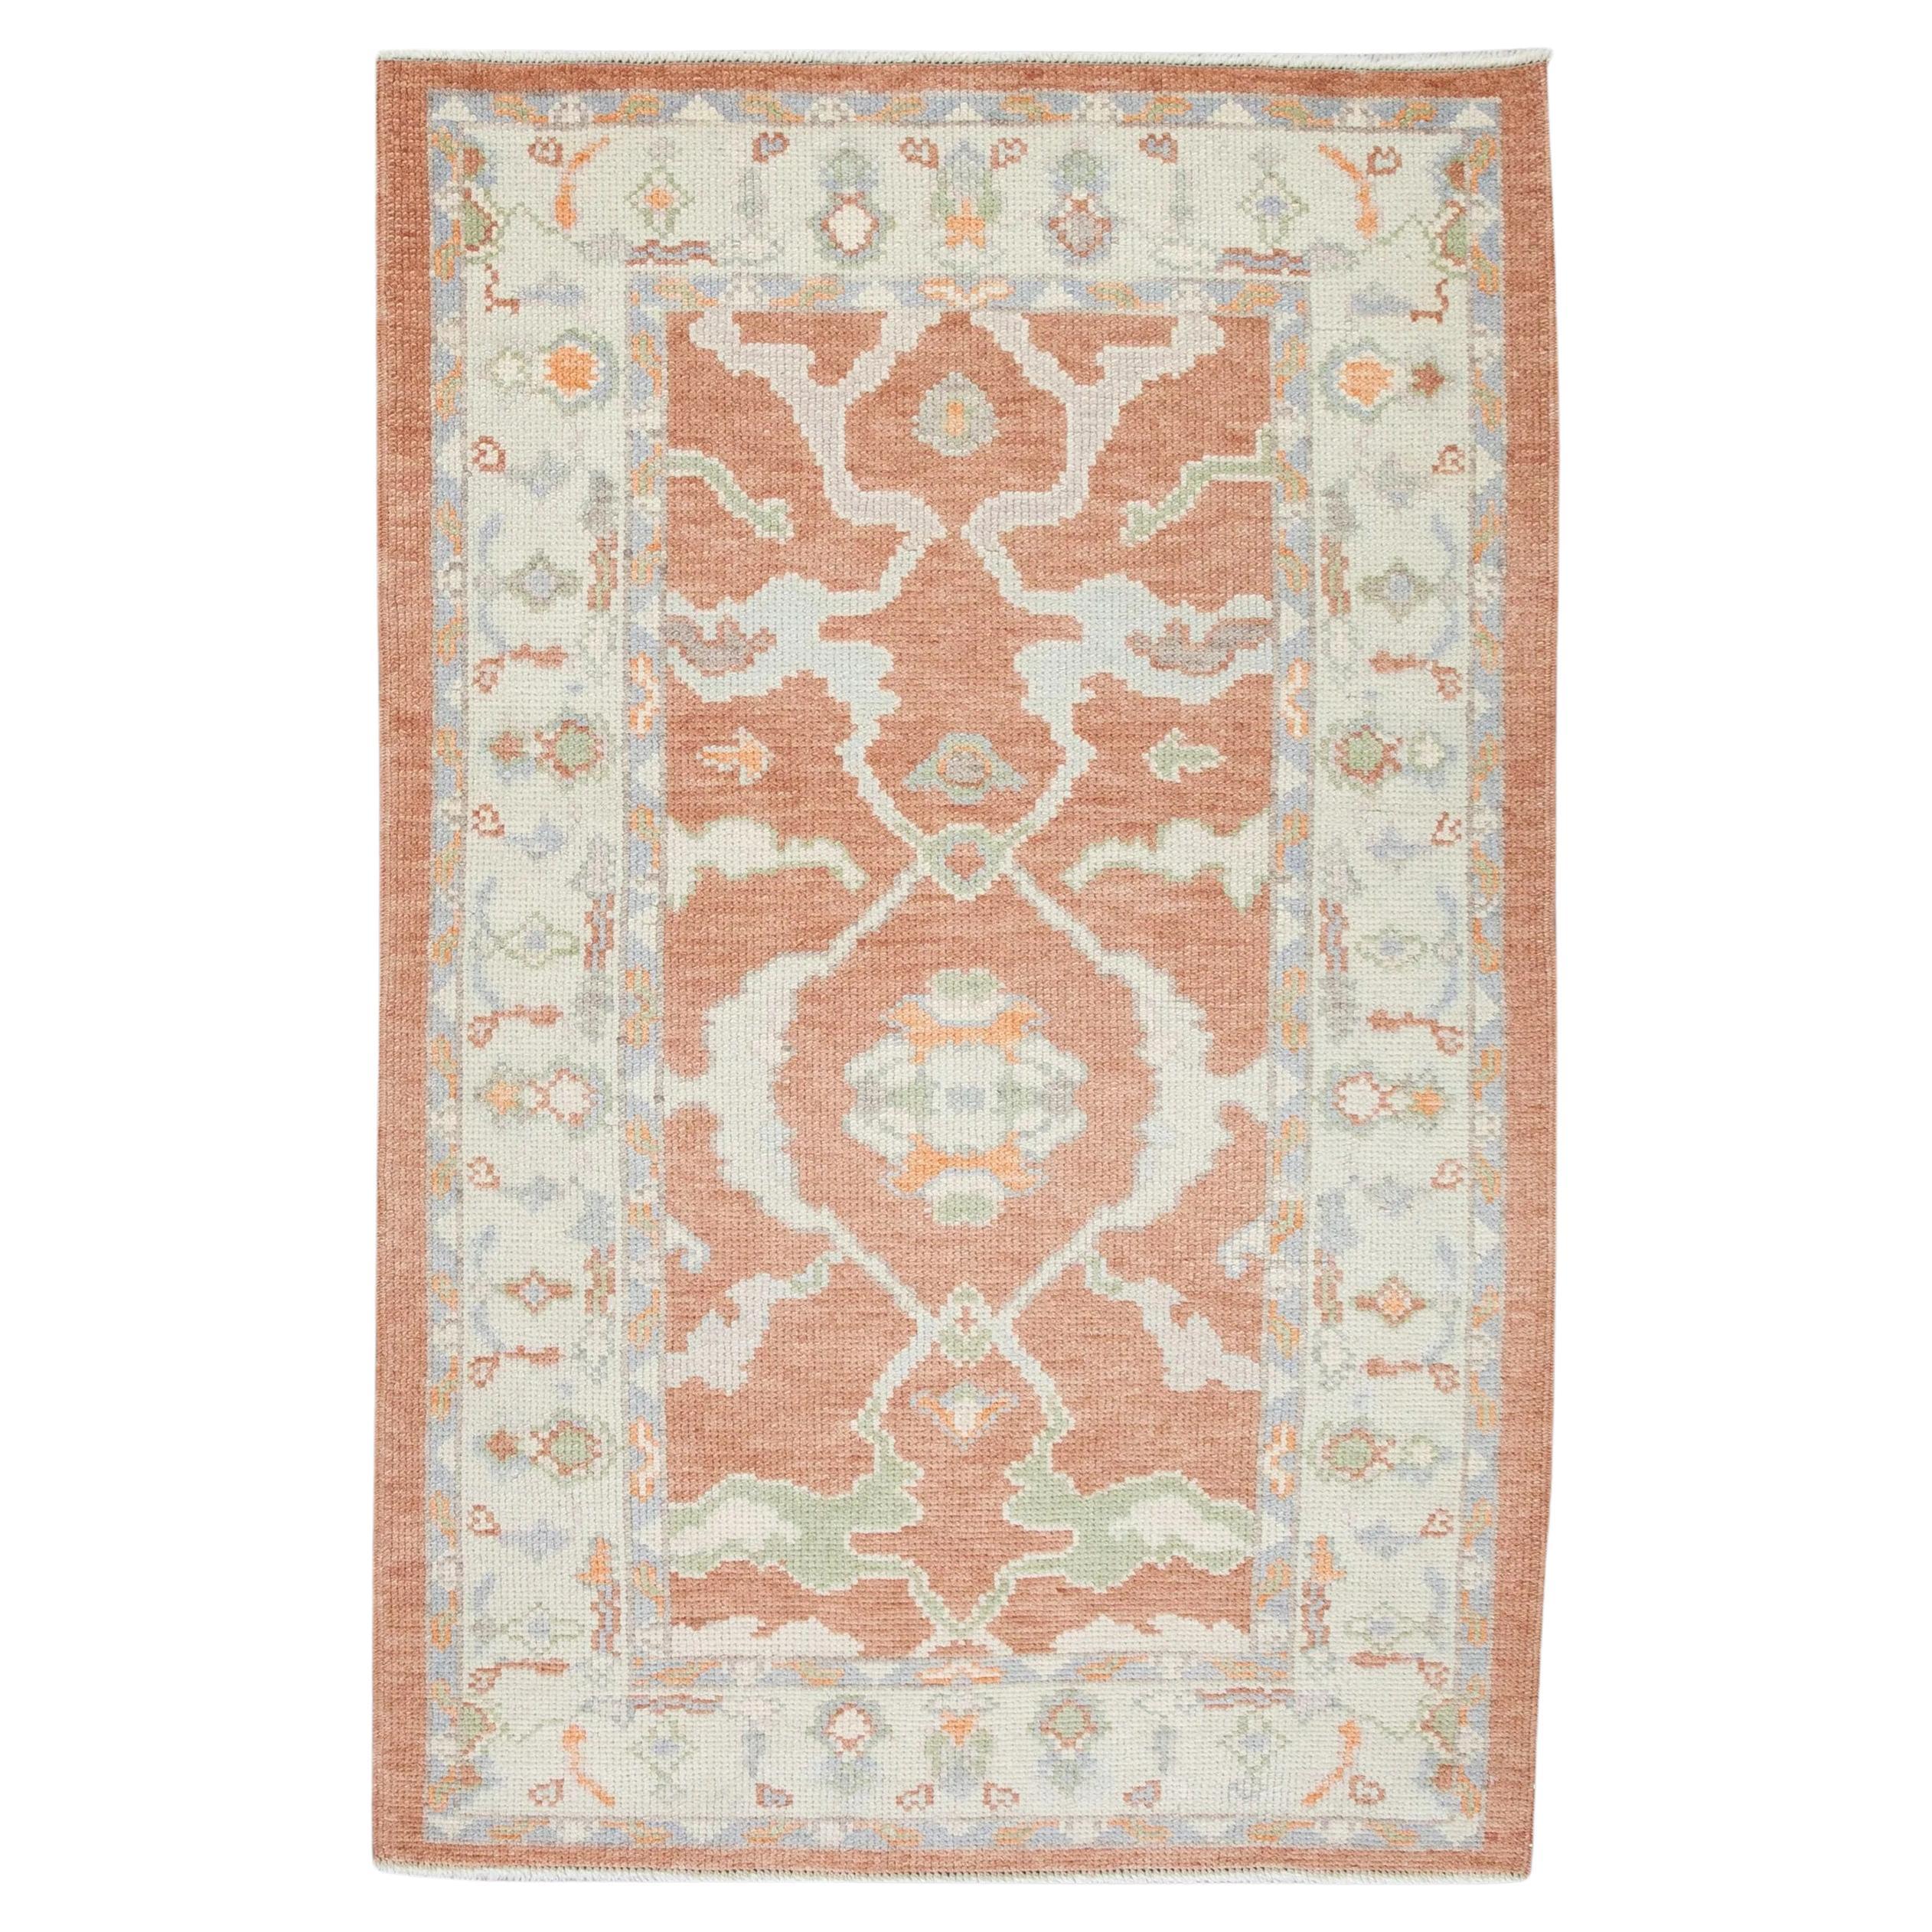 All-Over Floral Handwoven Turkish Oushak Rug in Coral, Cream, and Blue 3'2 x 5'1